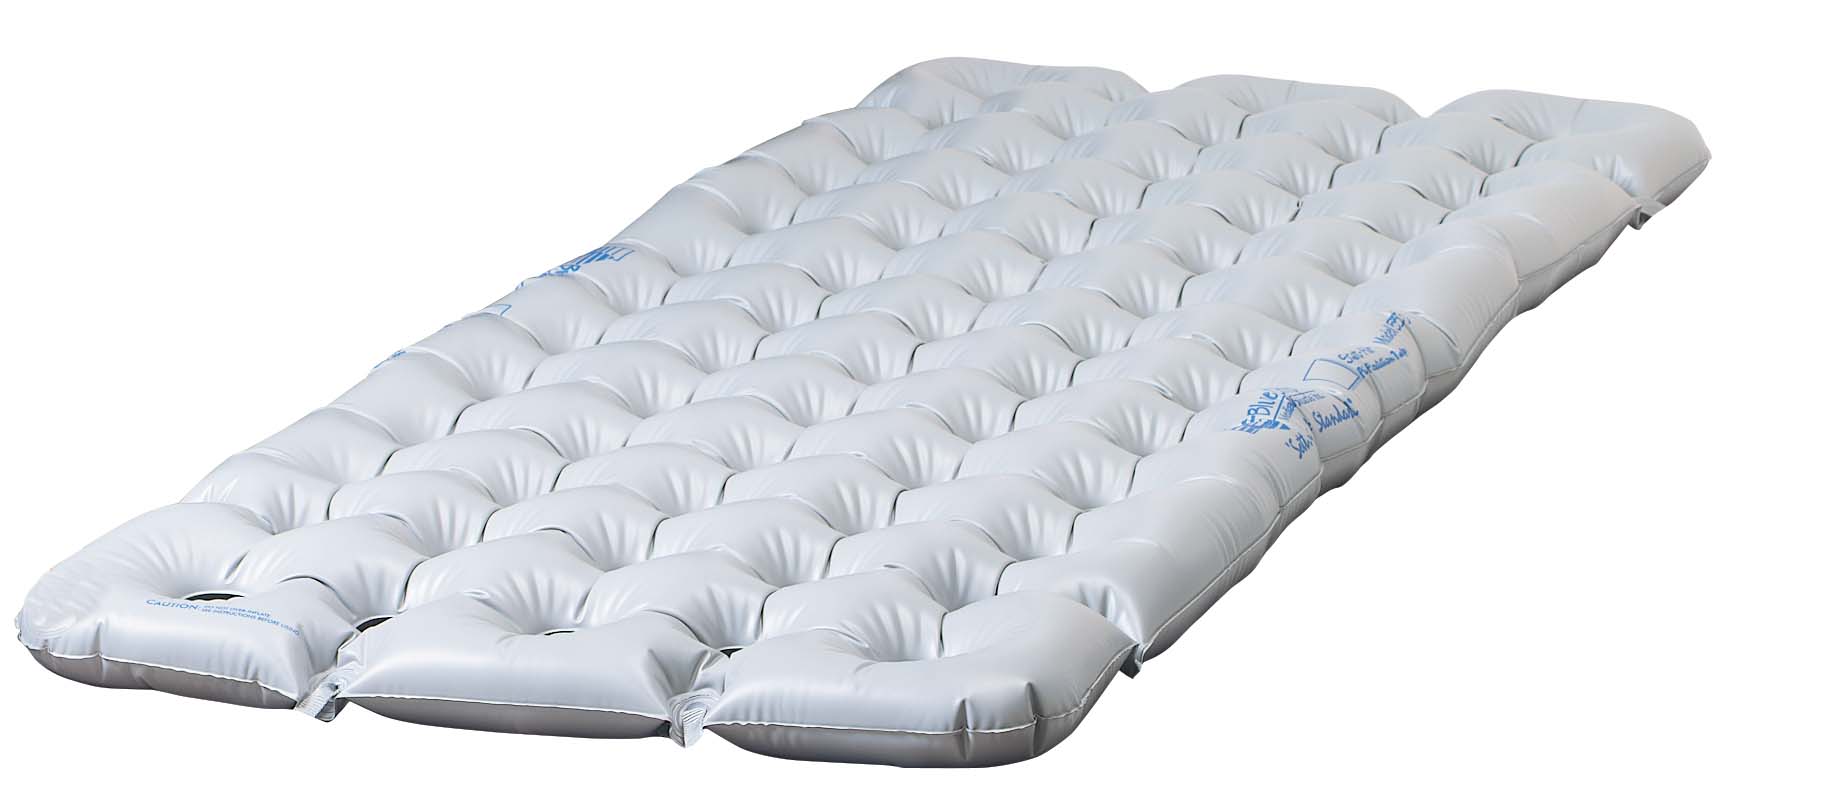 1003g mattress inflated static air